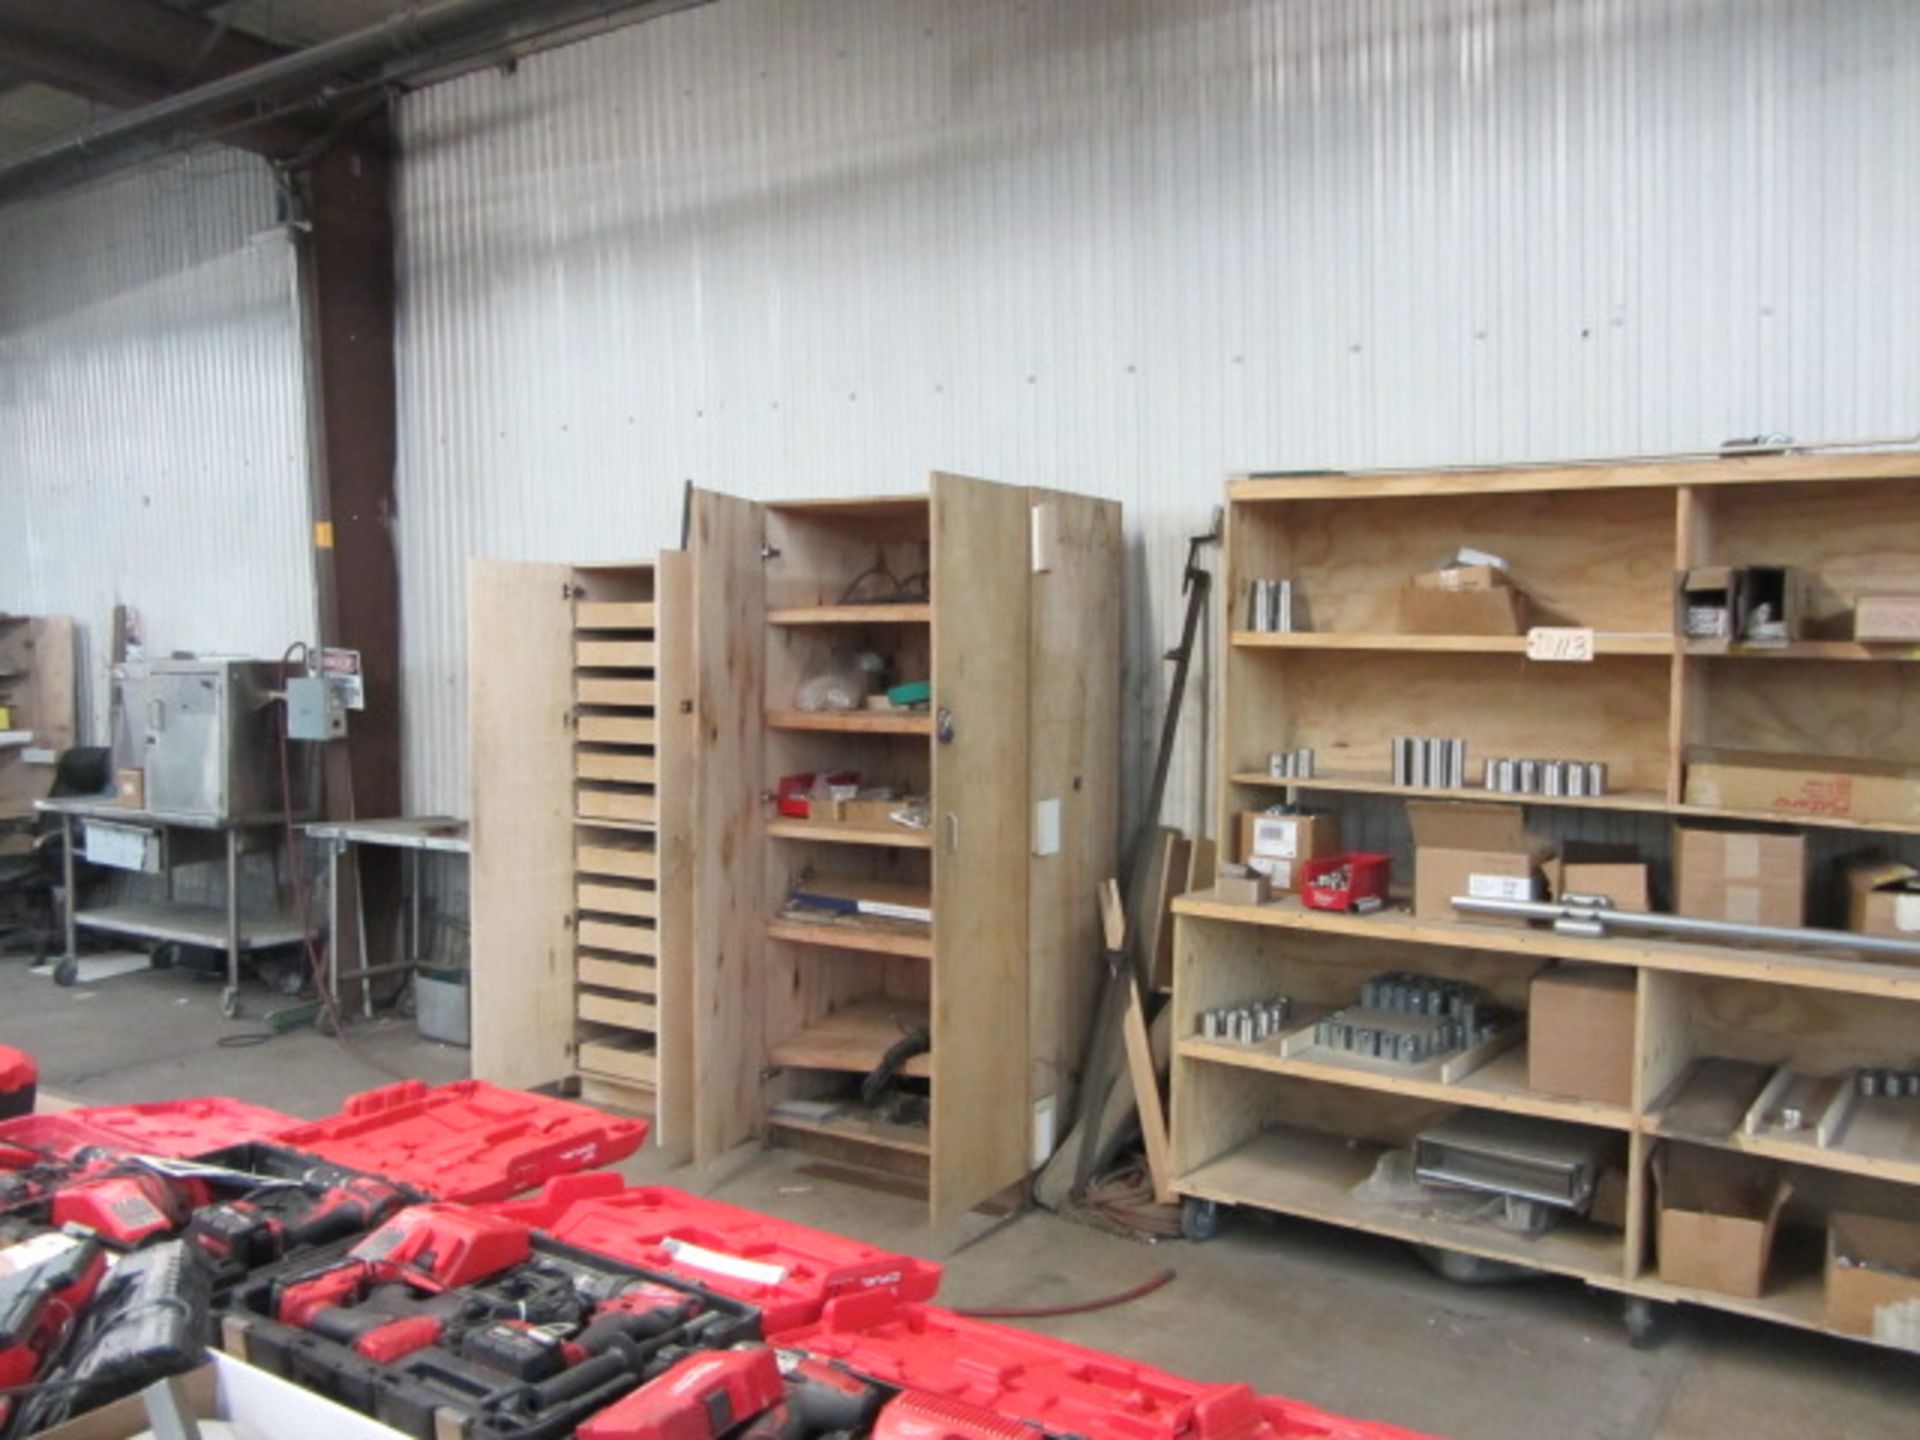 Workbenches & Cabinets (along wall)